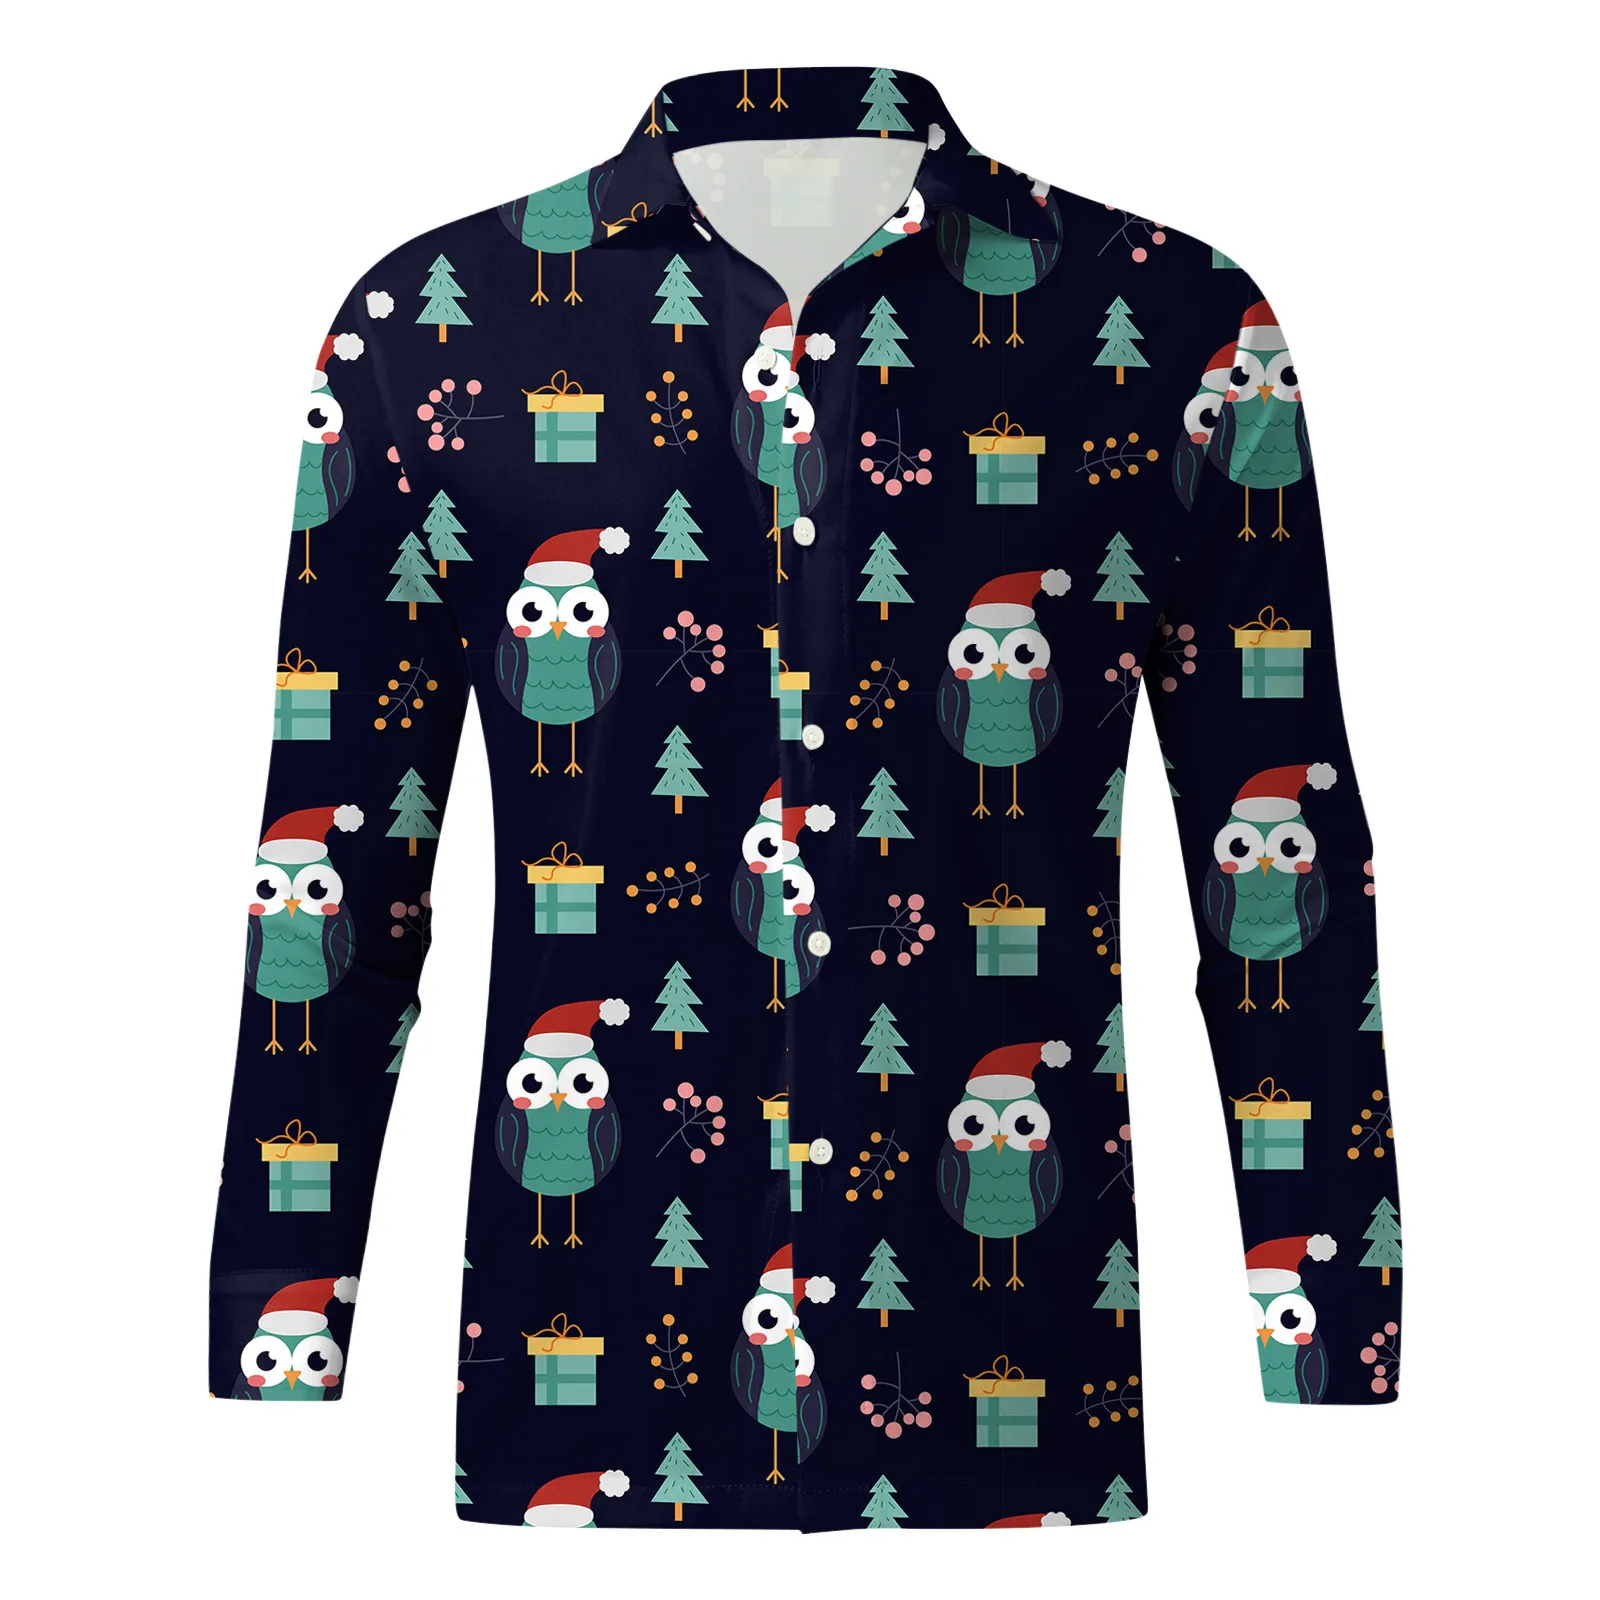 

Ugly Christmas Button Shirts Mens Long Sleeve Reindeer Print Blouses Xmas Vantage New Year Camisas Blusas Autumn T Shirts Male